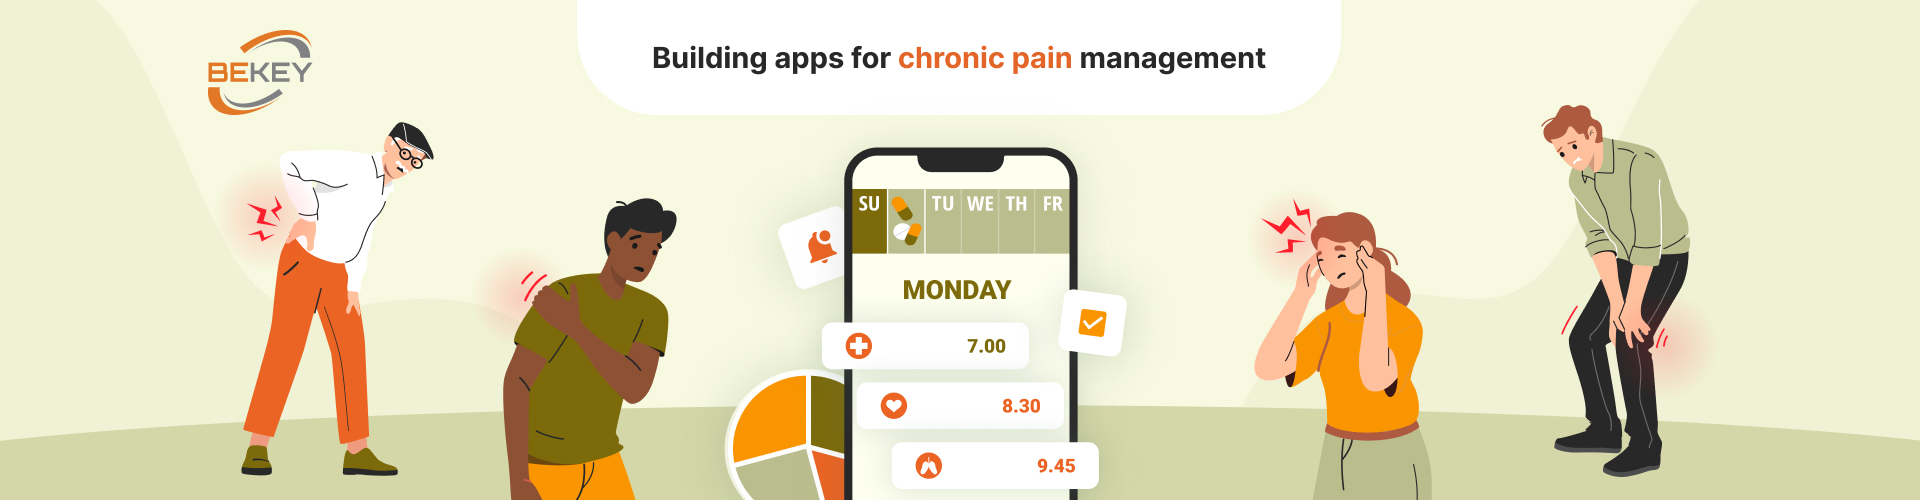 Building apps for chronic pain management